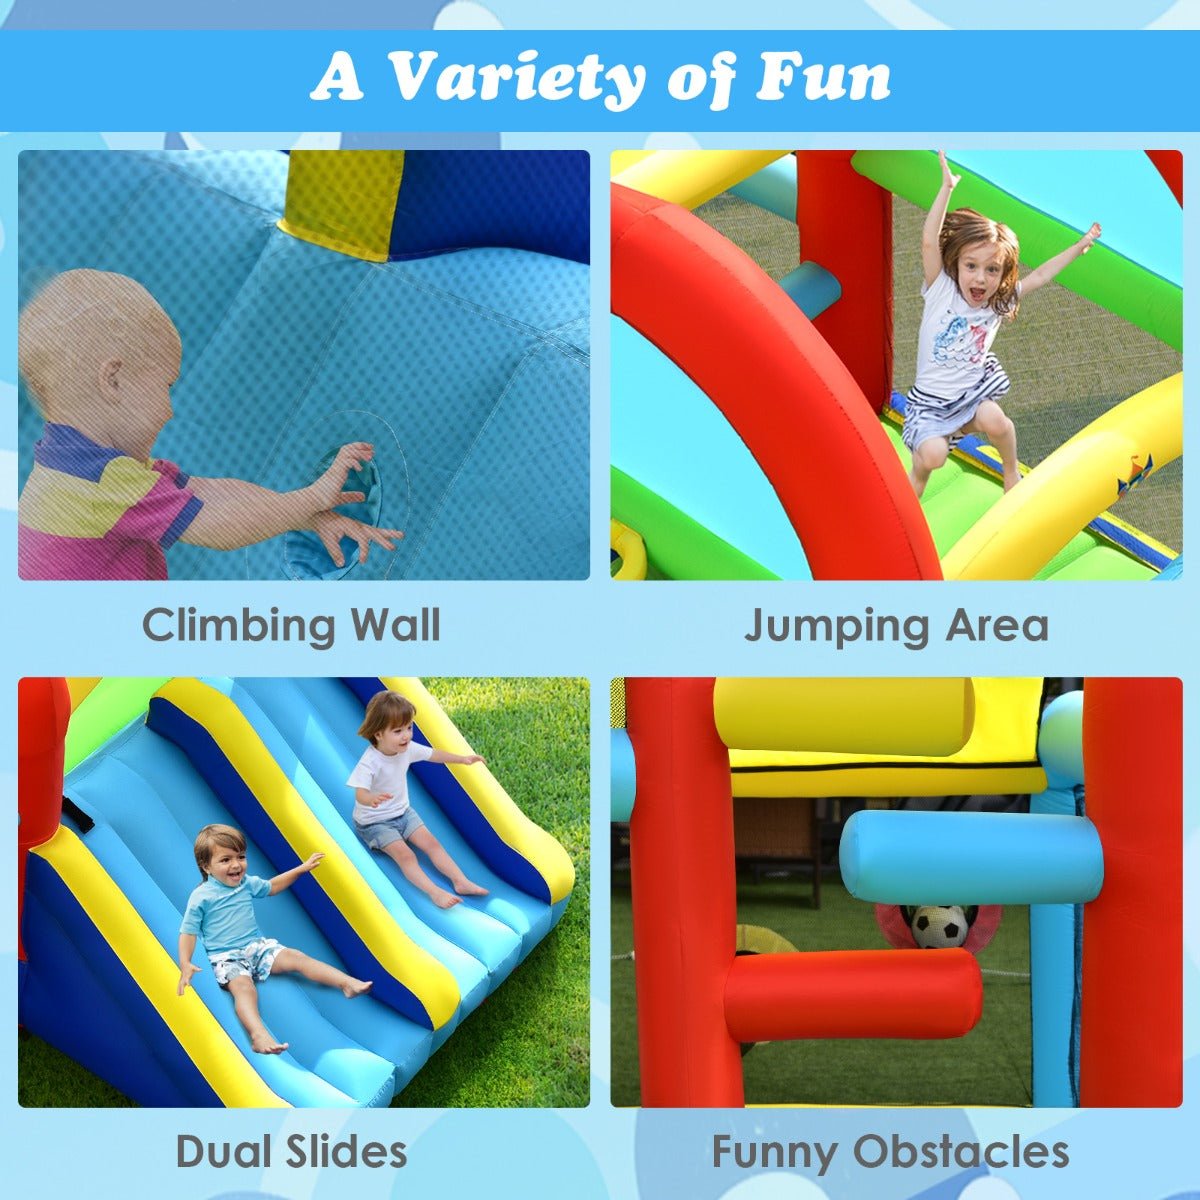 Kids Bounce House Inflatable - Dual Slides Adventure (Blower Included)